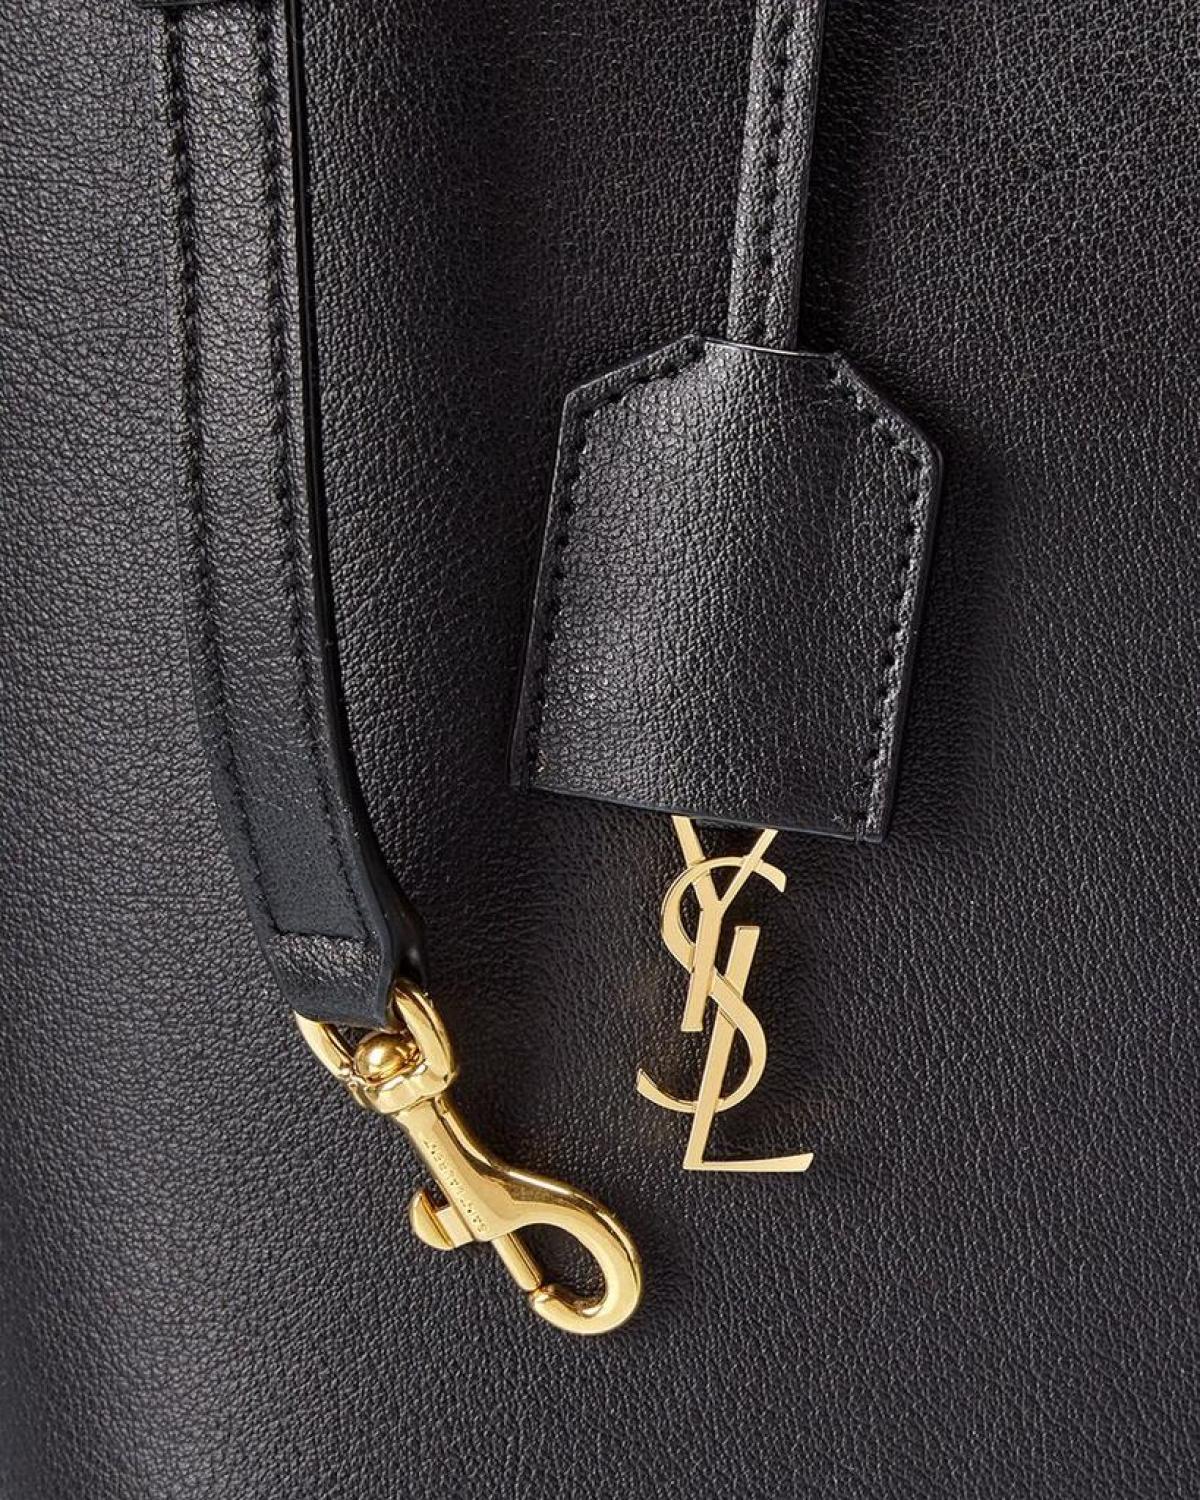 ! Saint Laurent Toy N/S Leather Tote